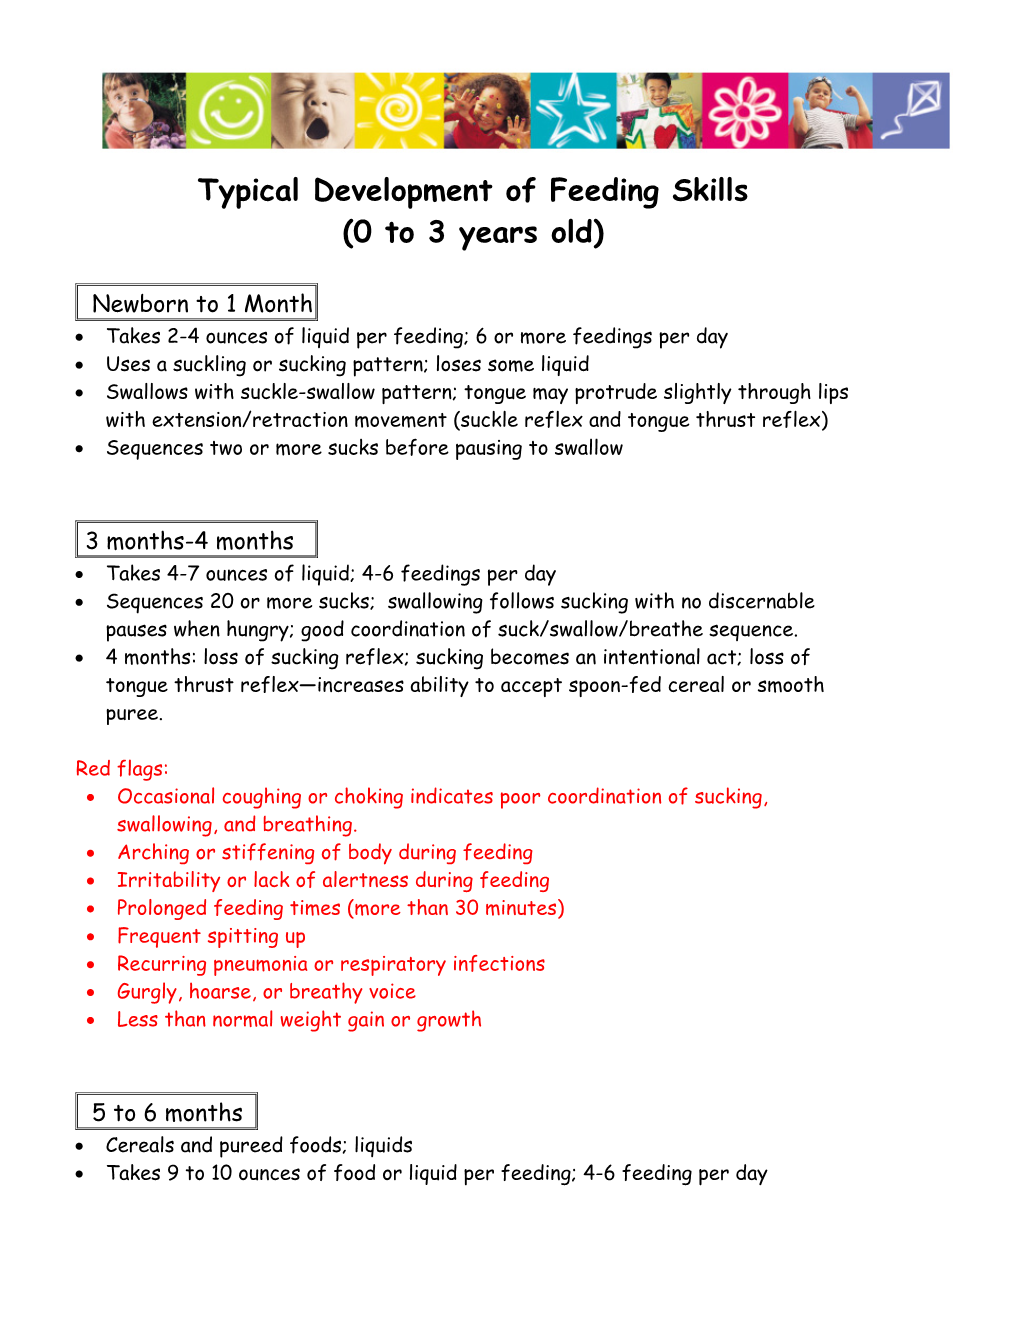 Typical Development of Feeding Skills (0 to 3 Years Old)